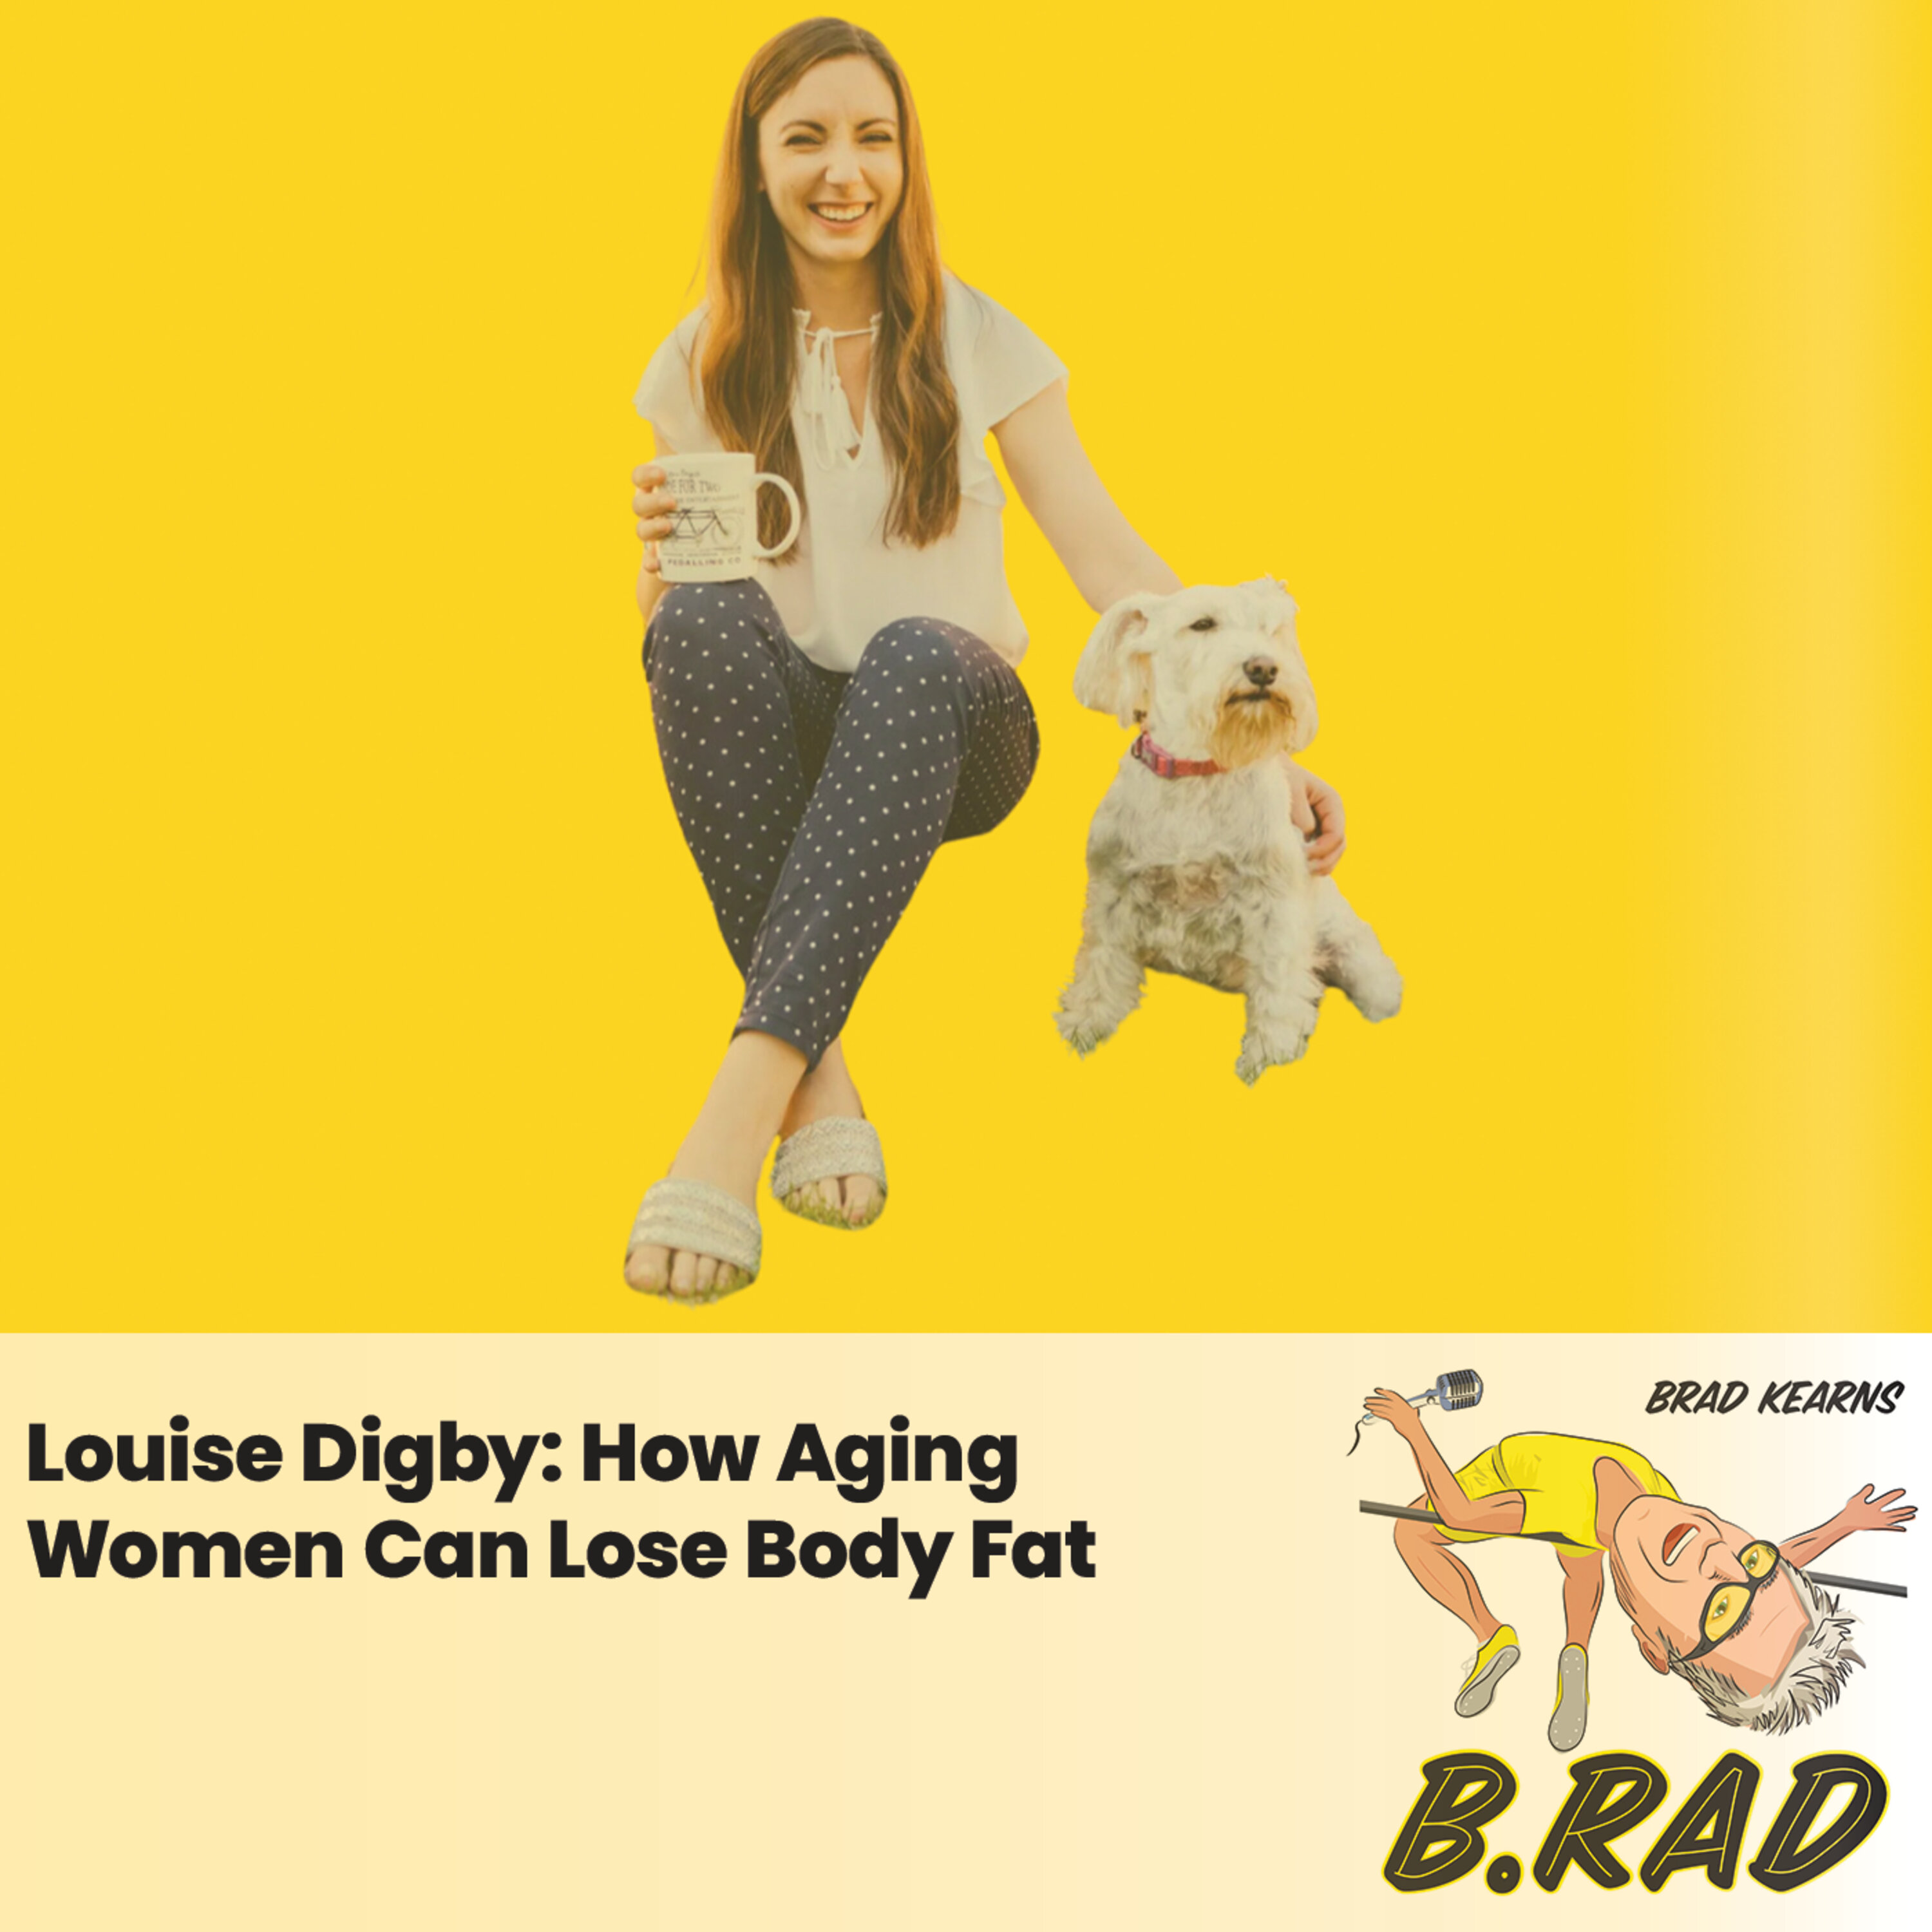 Louise Digby: How Aging Women Can Lose Body Fat